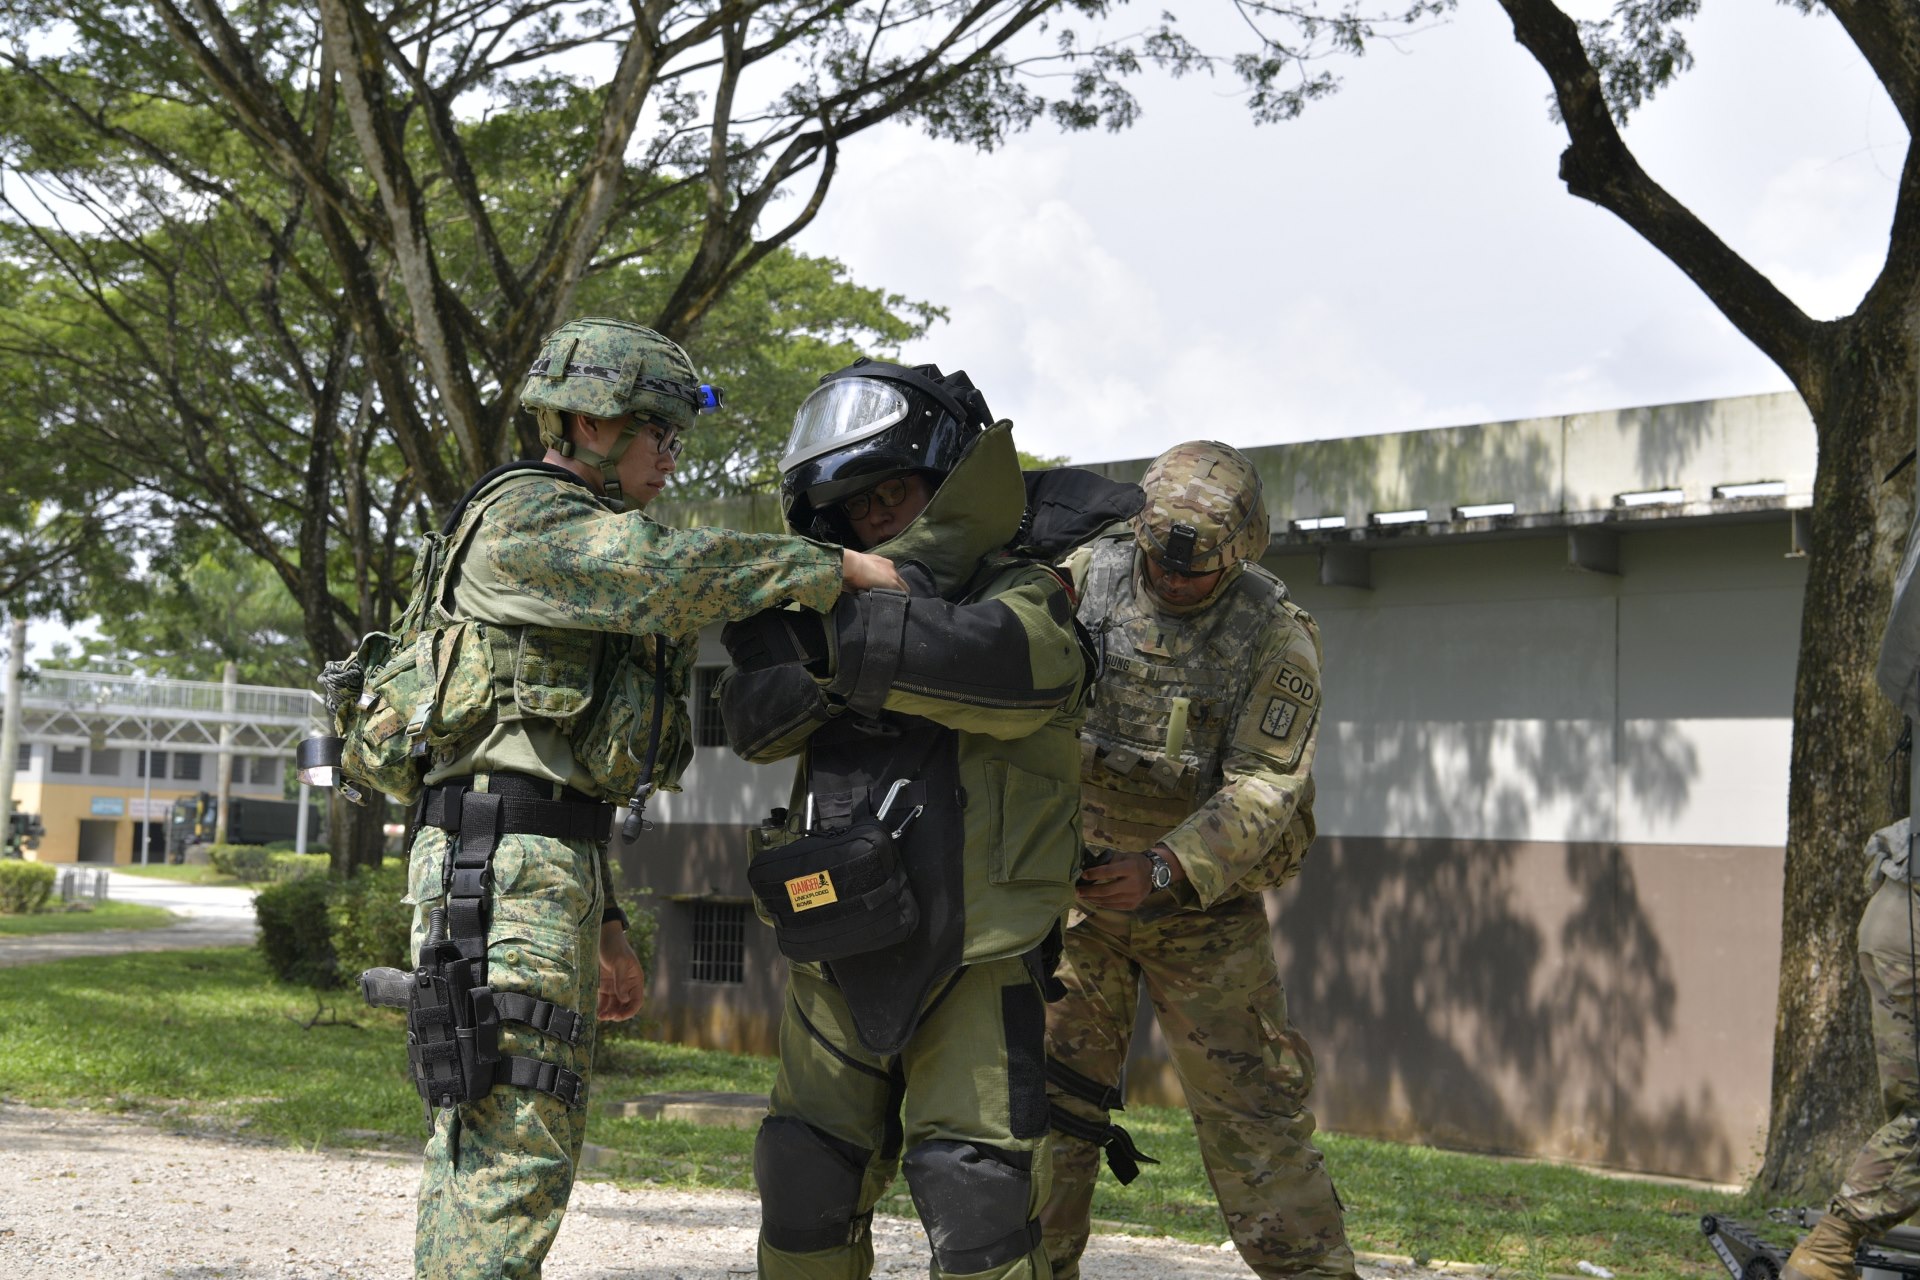 Personnel from the 36th Battalion, Singapore Combat Engineers and the US Army’s 303rd EOD Battalion preparing for a counter IED mission. 